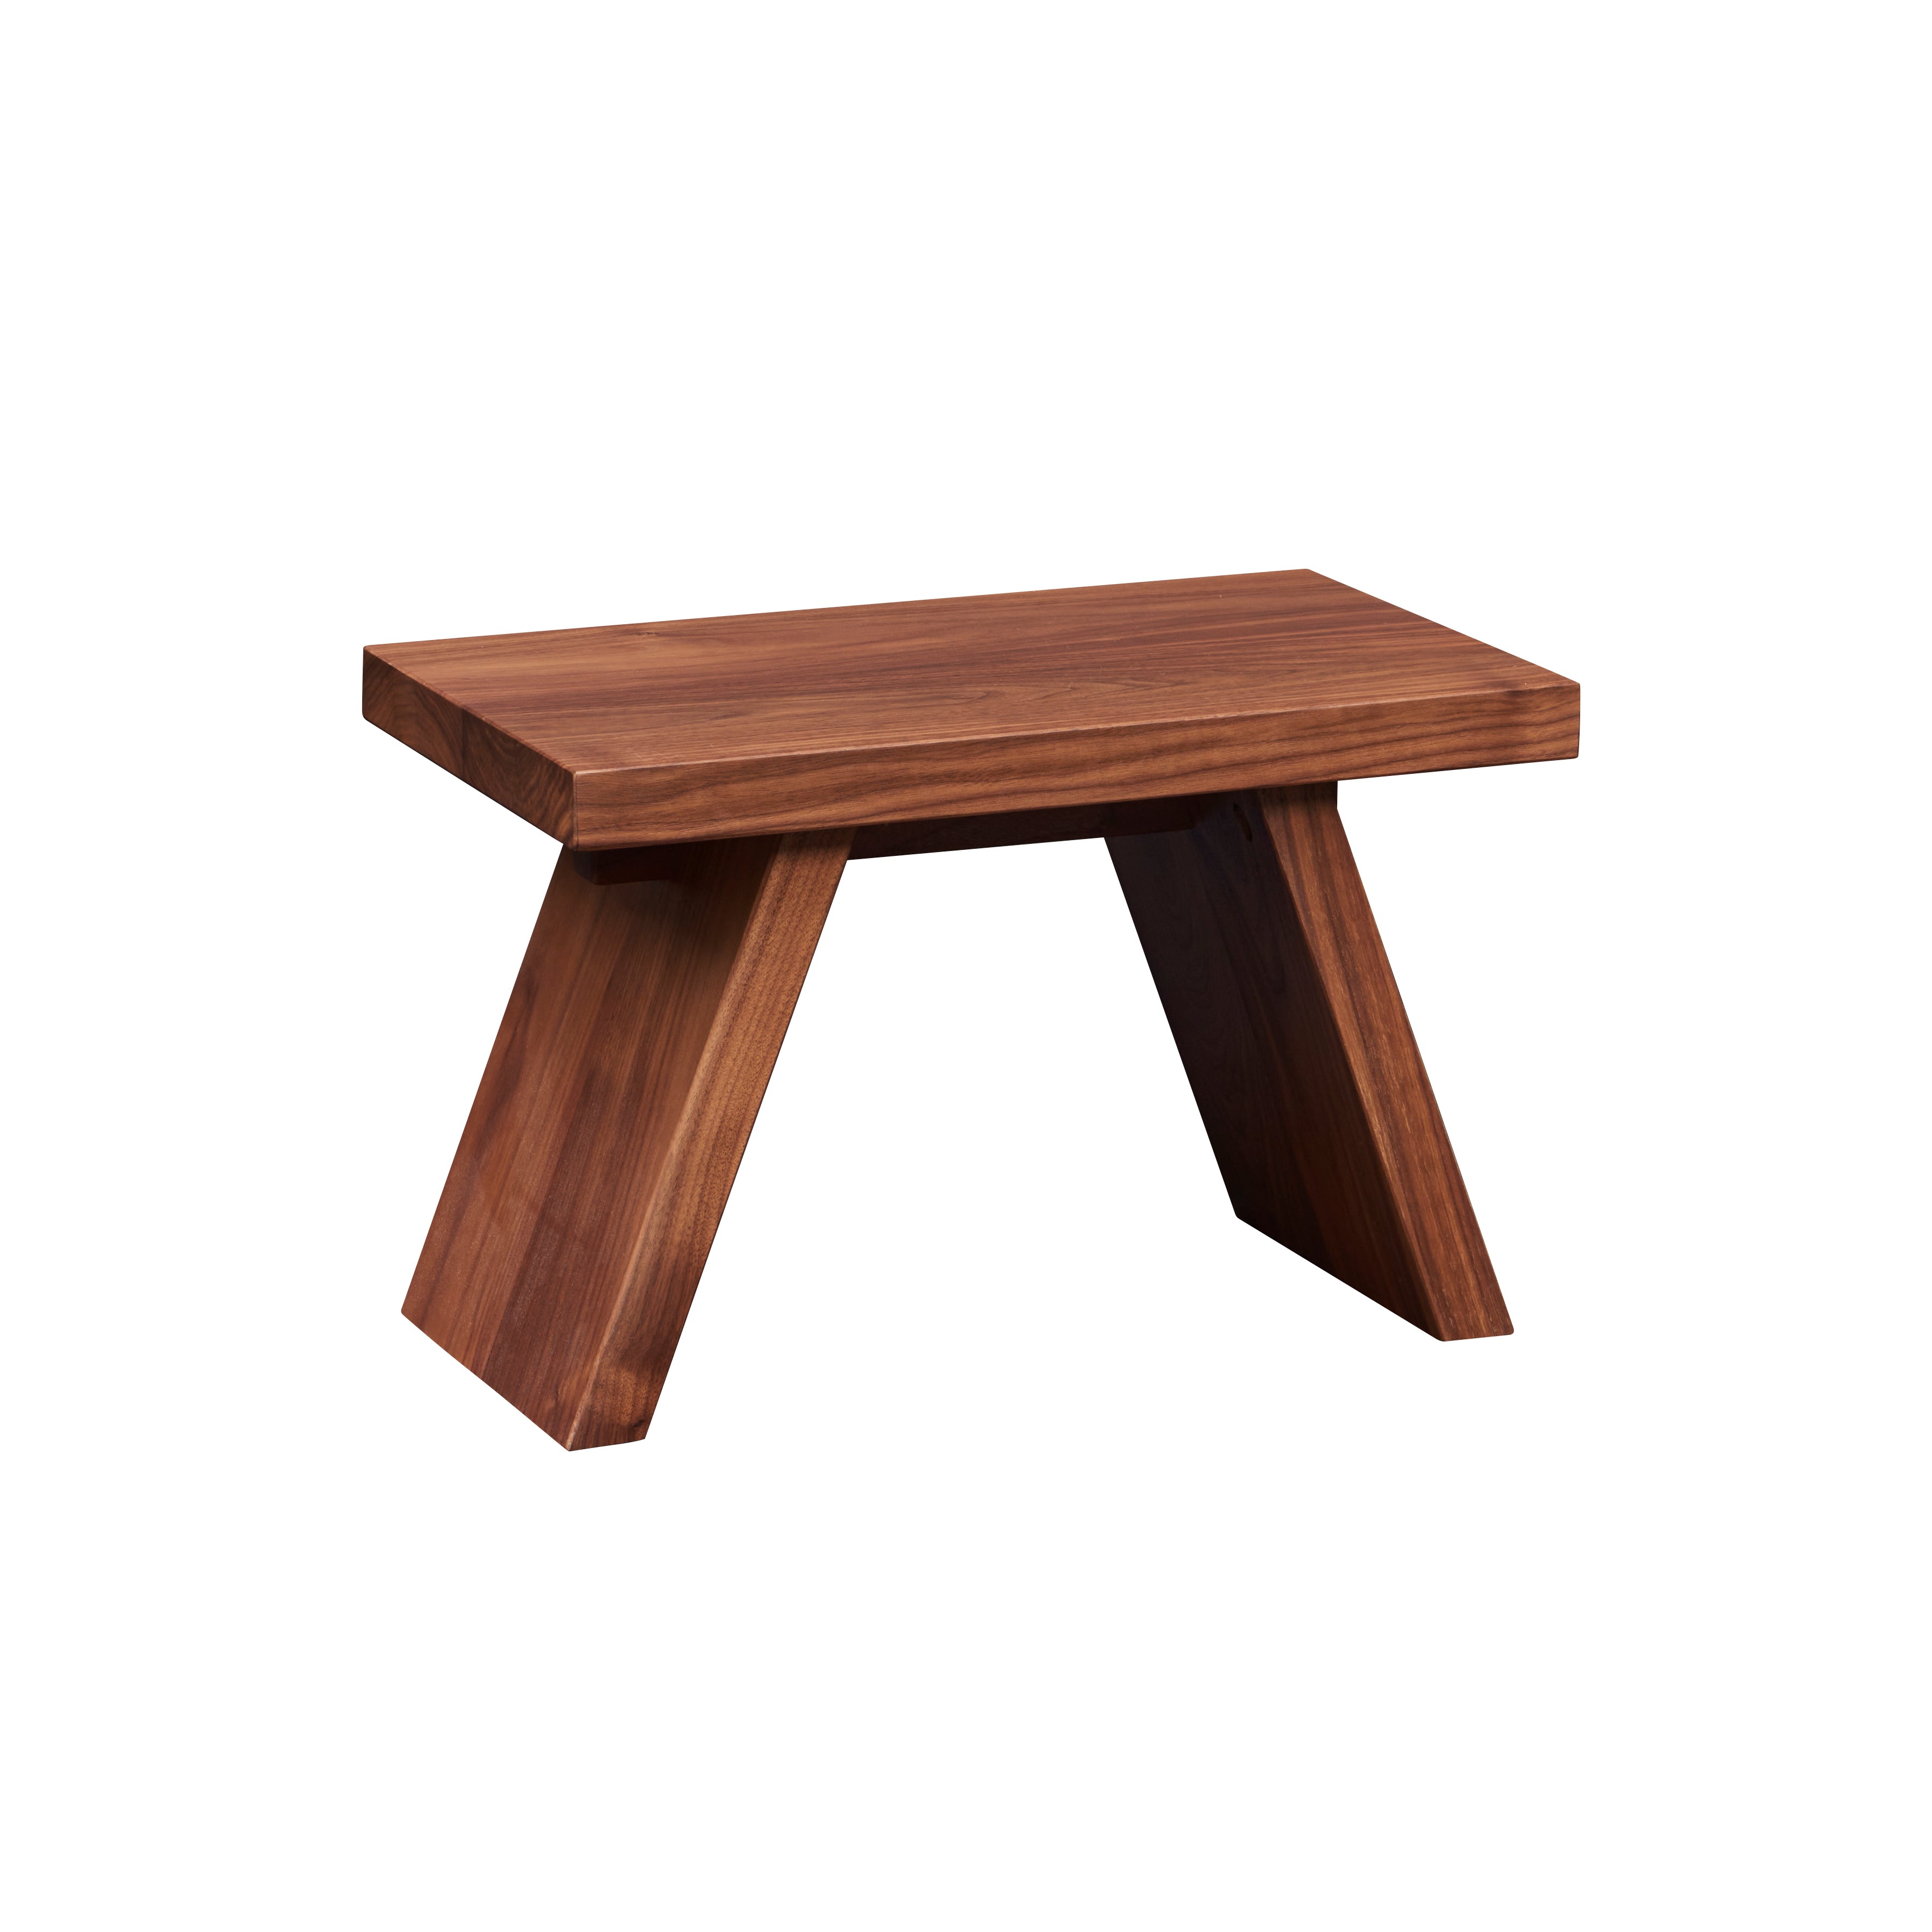 Solid walnut wood step stool with angled legs.